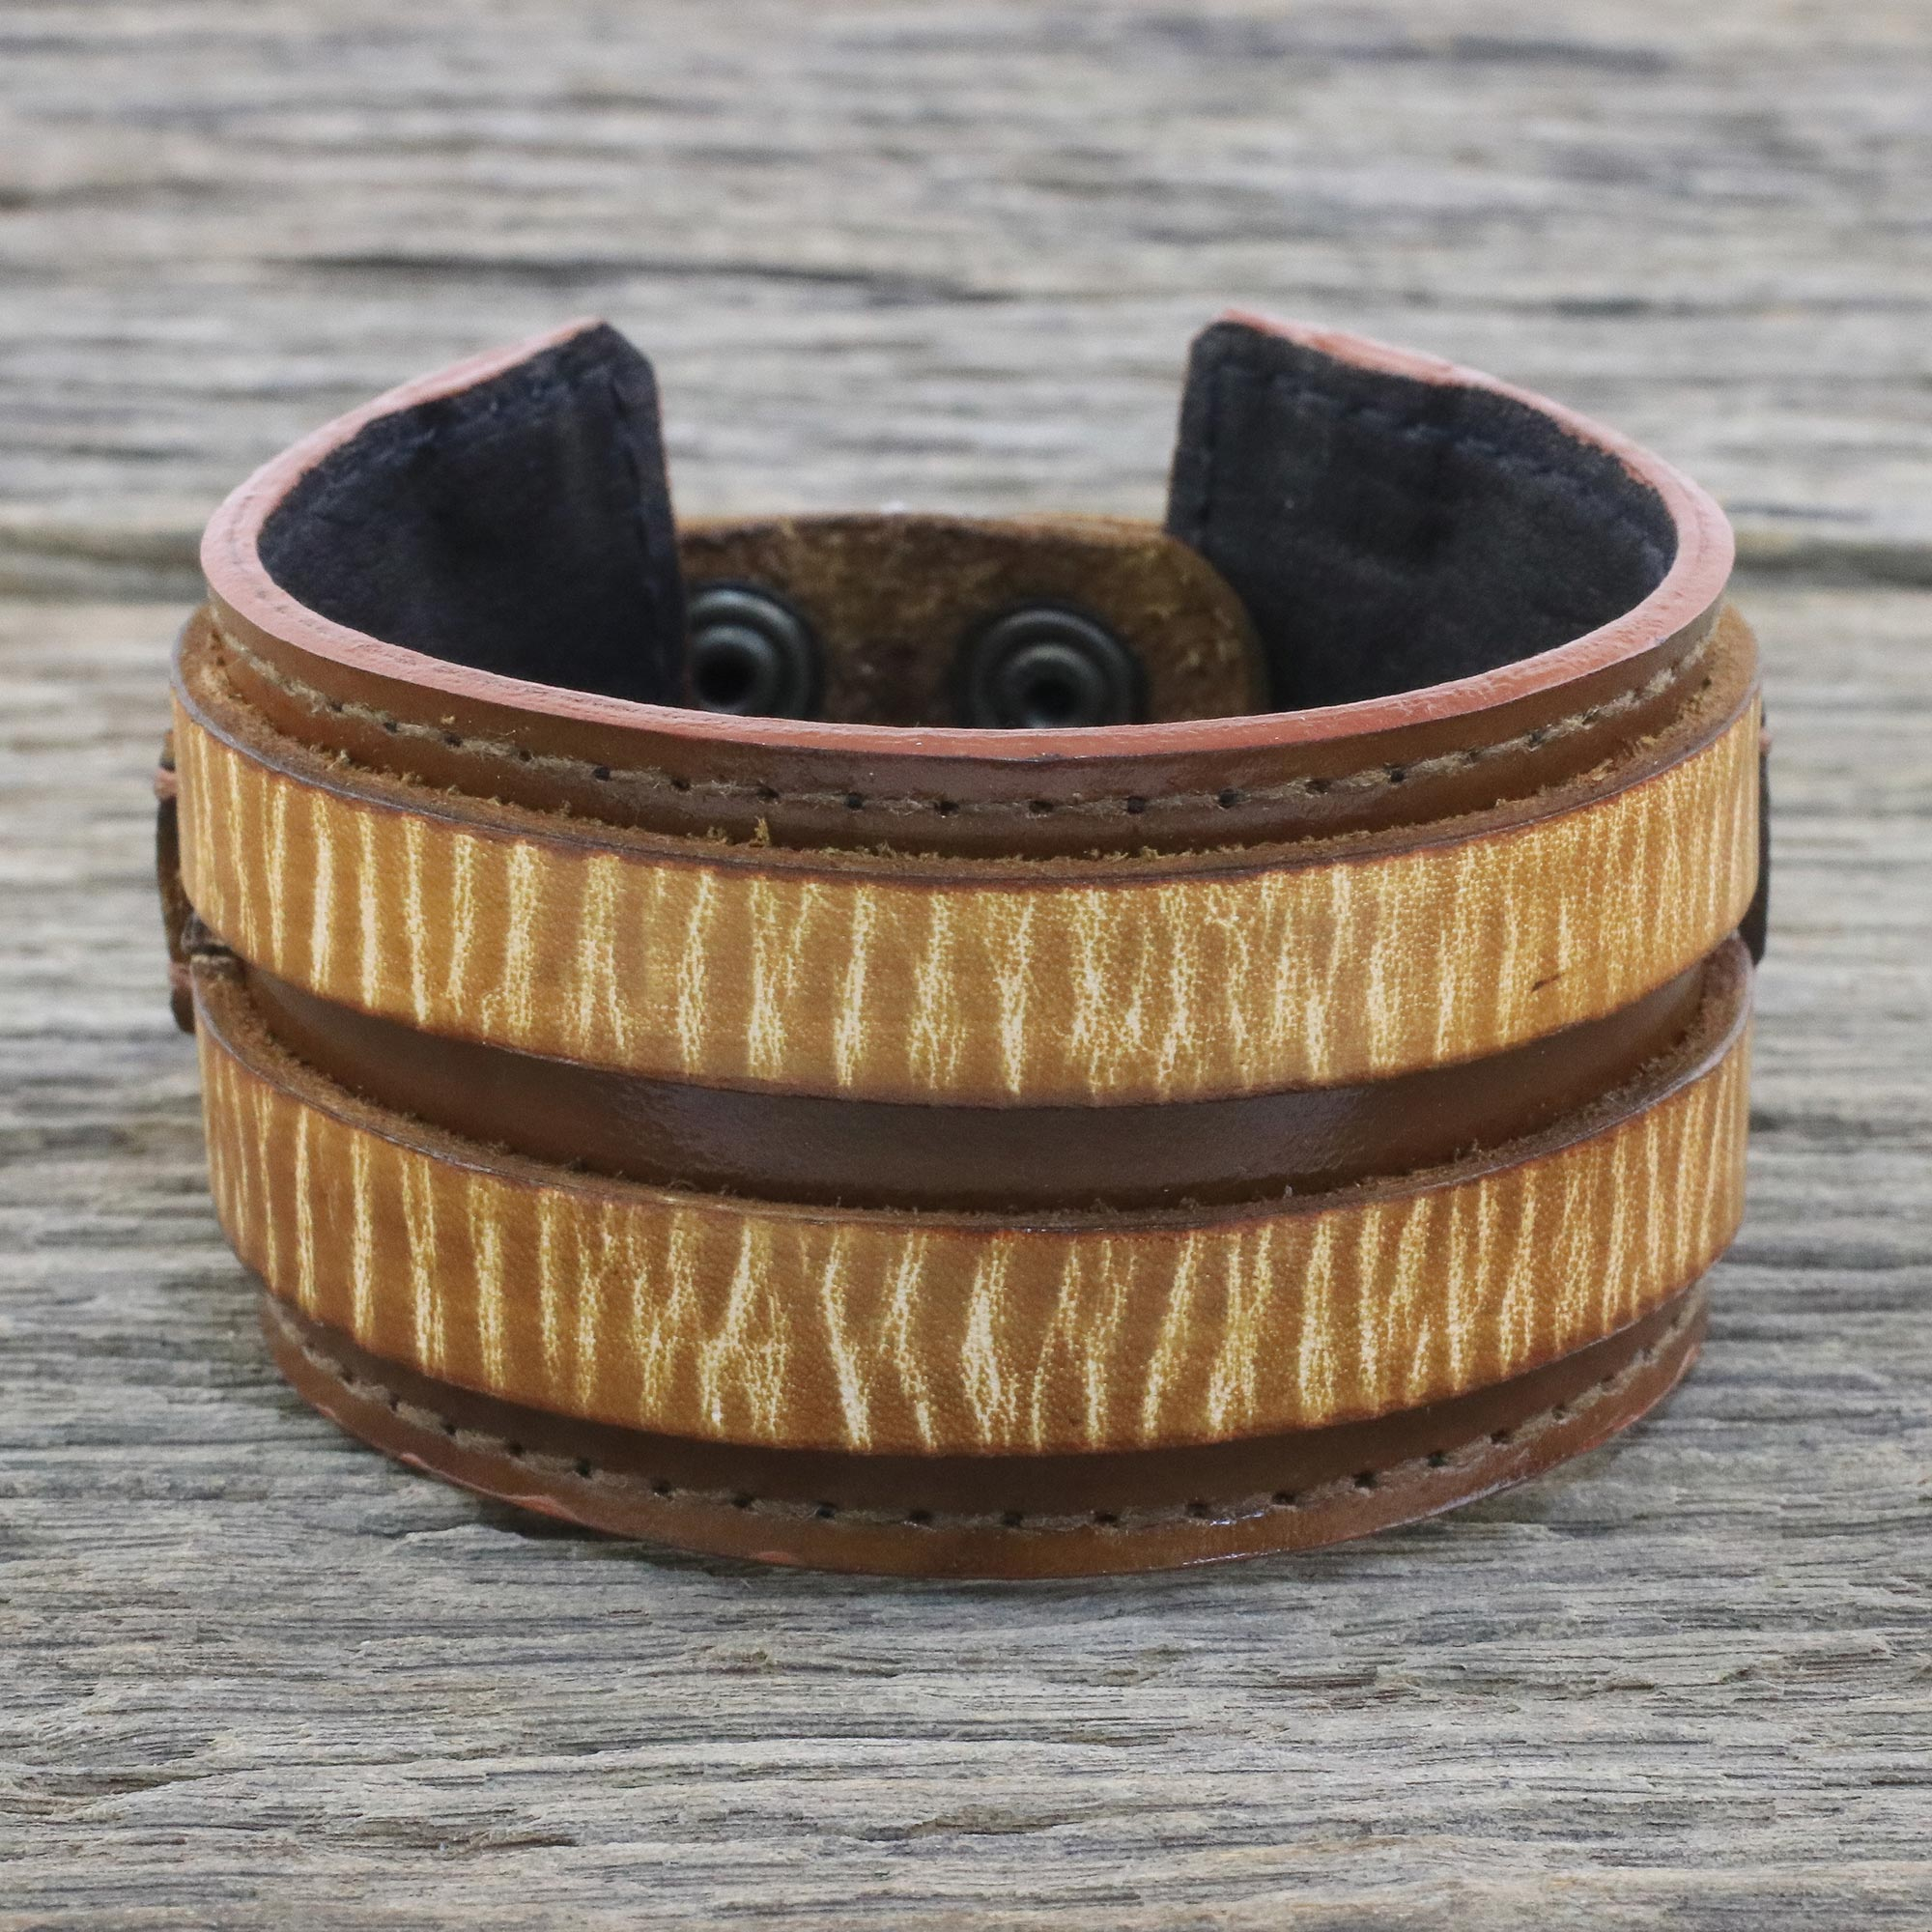 Handcrafted Men's Leather Wristband Bracelet from Thailand, 'Genuine Charm